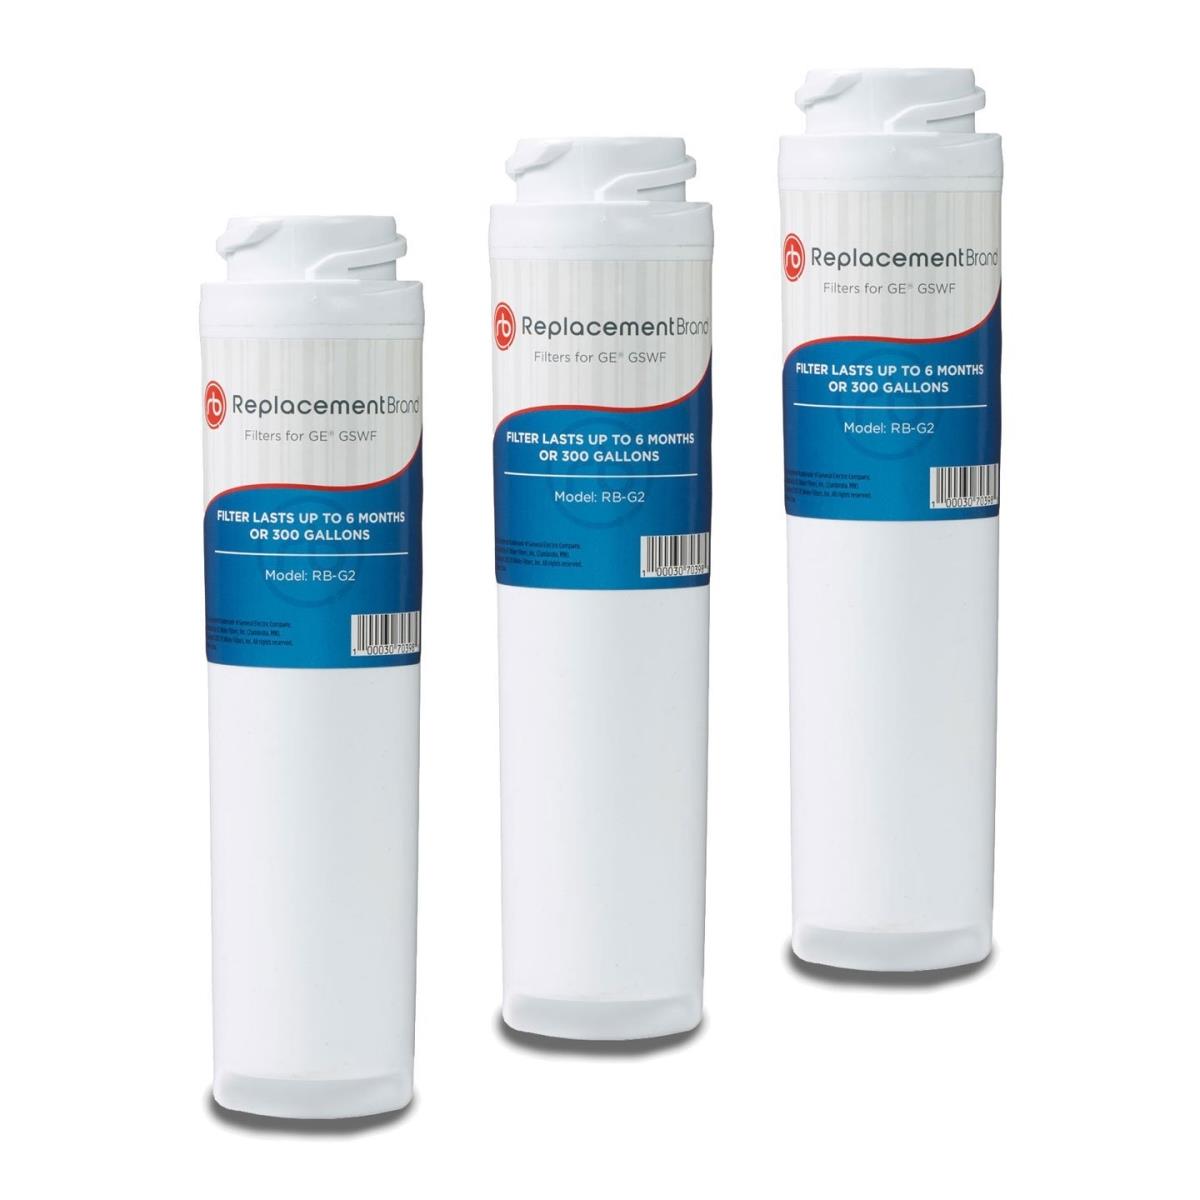 Replacement Brand Refrigerator Filter for GE GSWF -  Commercial Water Distributing, CO82520